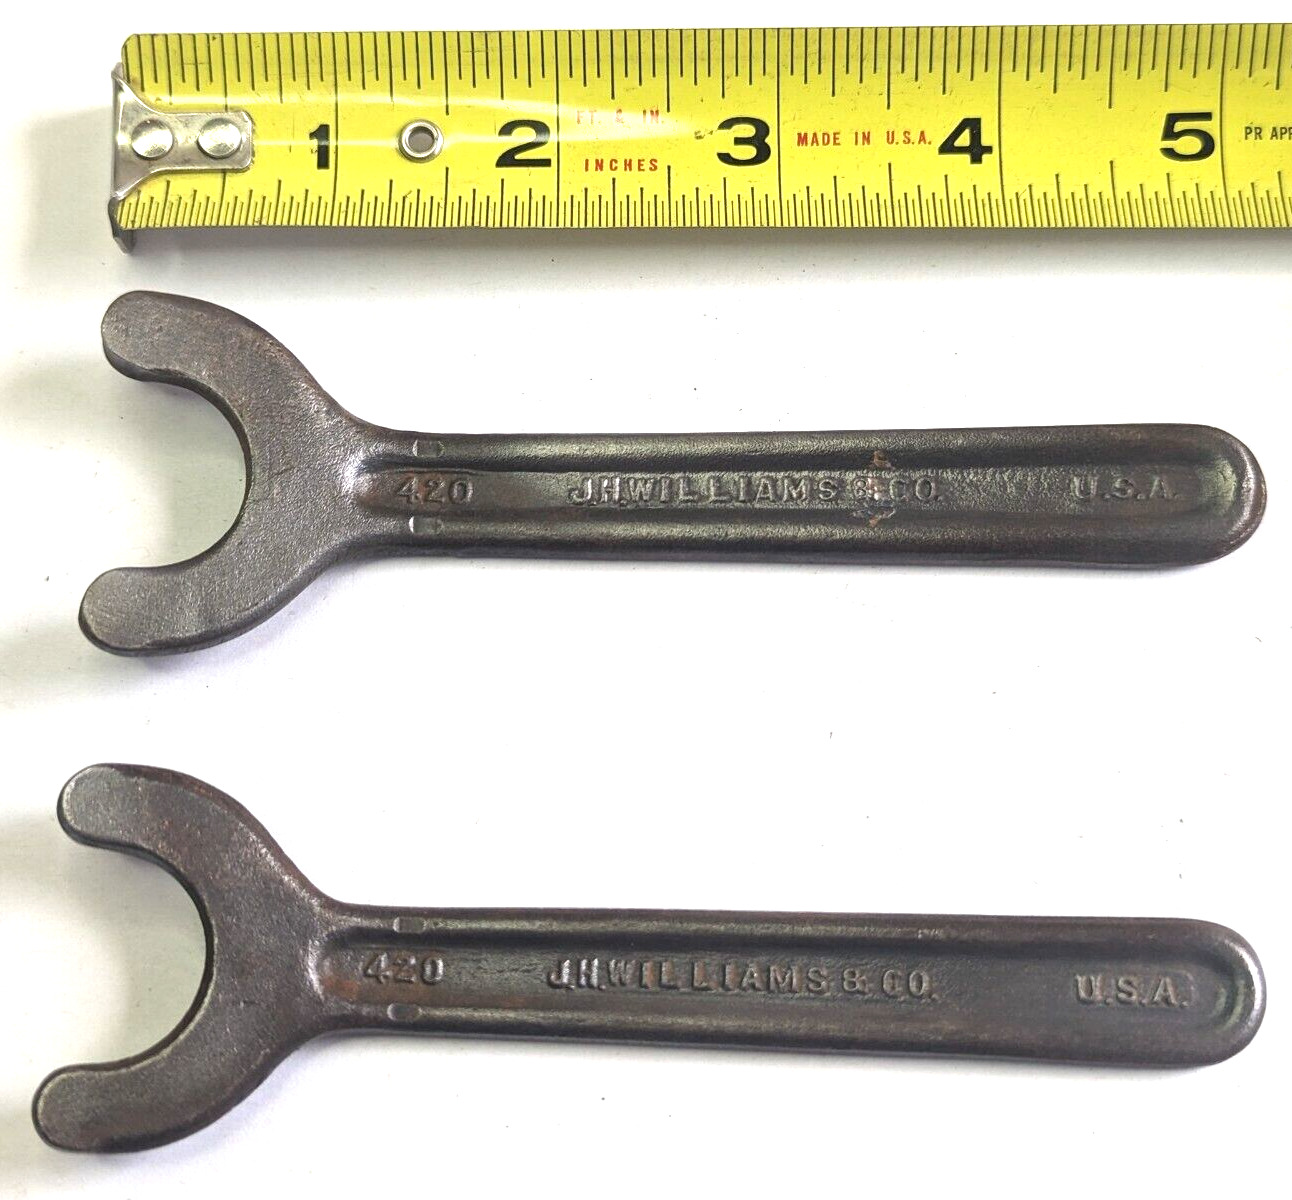 Vintage J.H. WILLIAMS #420 Double Pin Spanner Wrenches